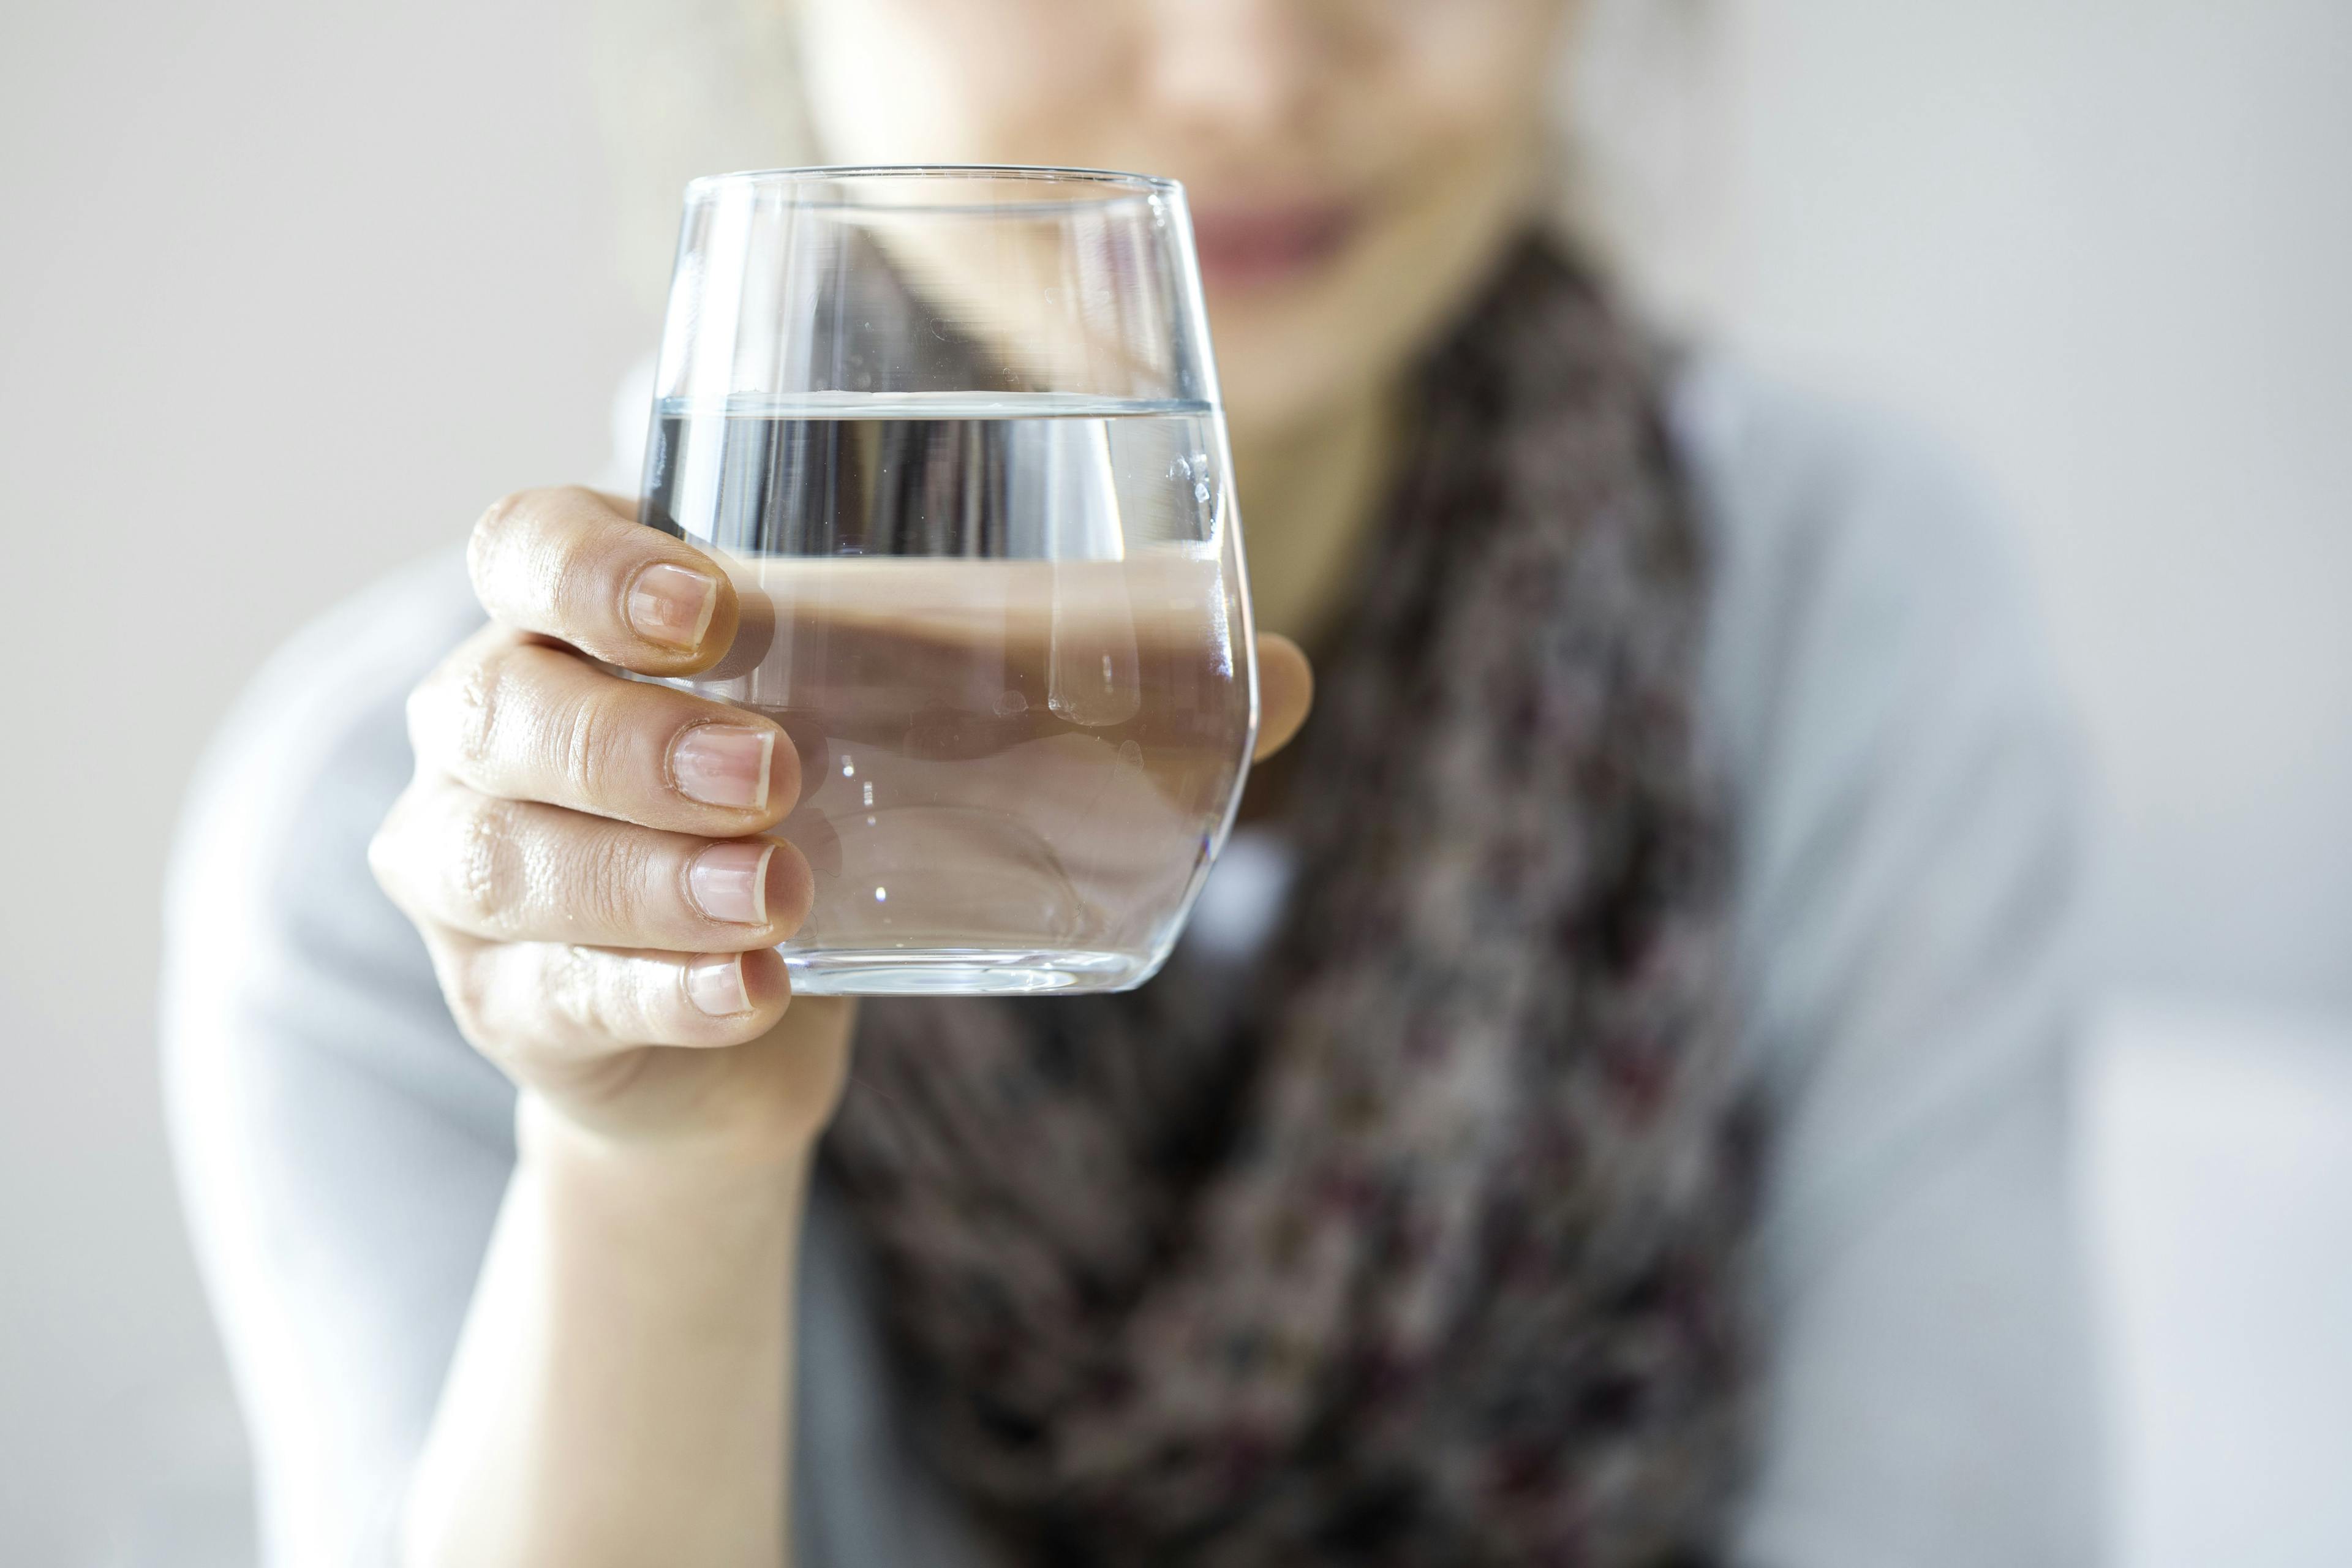 PFAS in drinking water and its impact on the female reproductive system